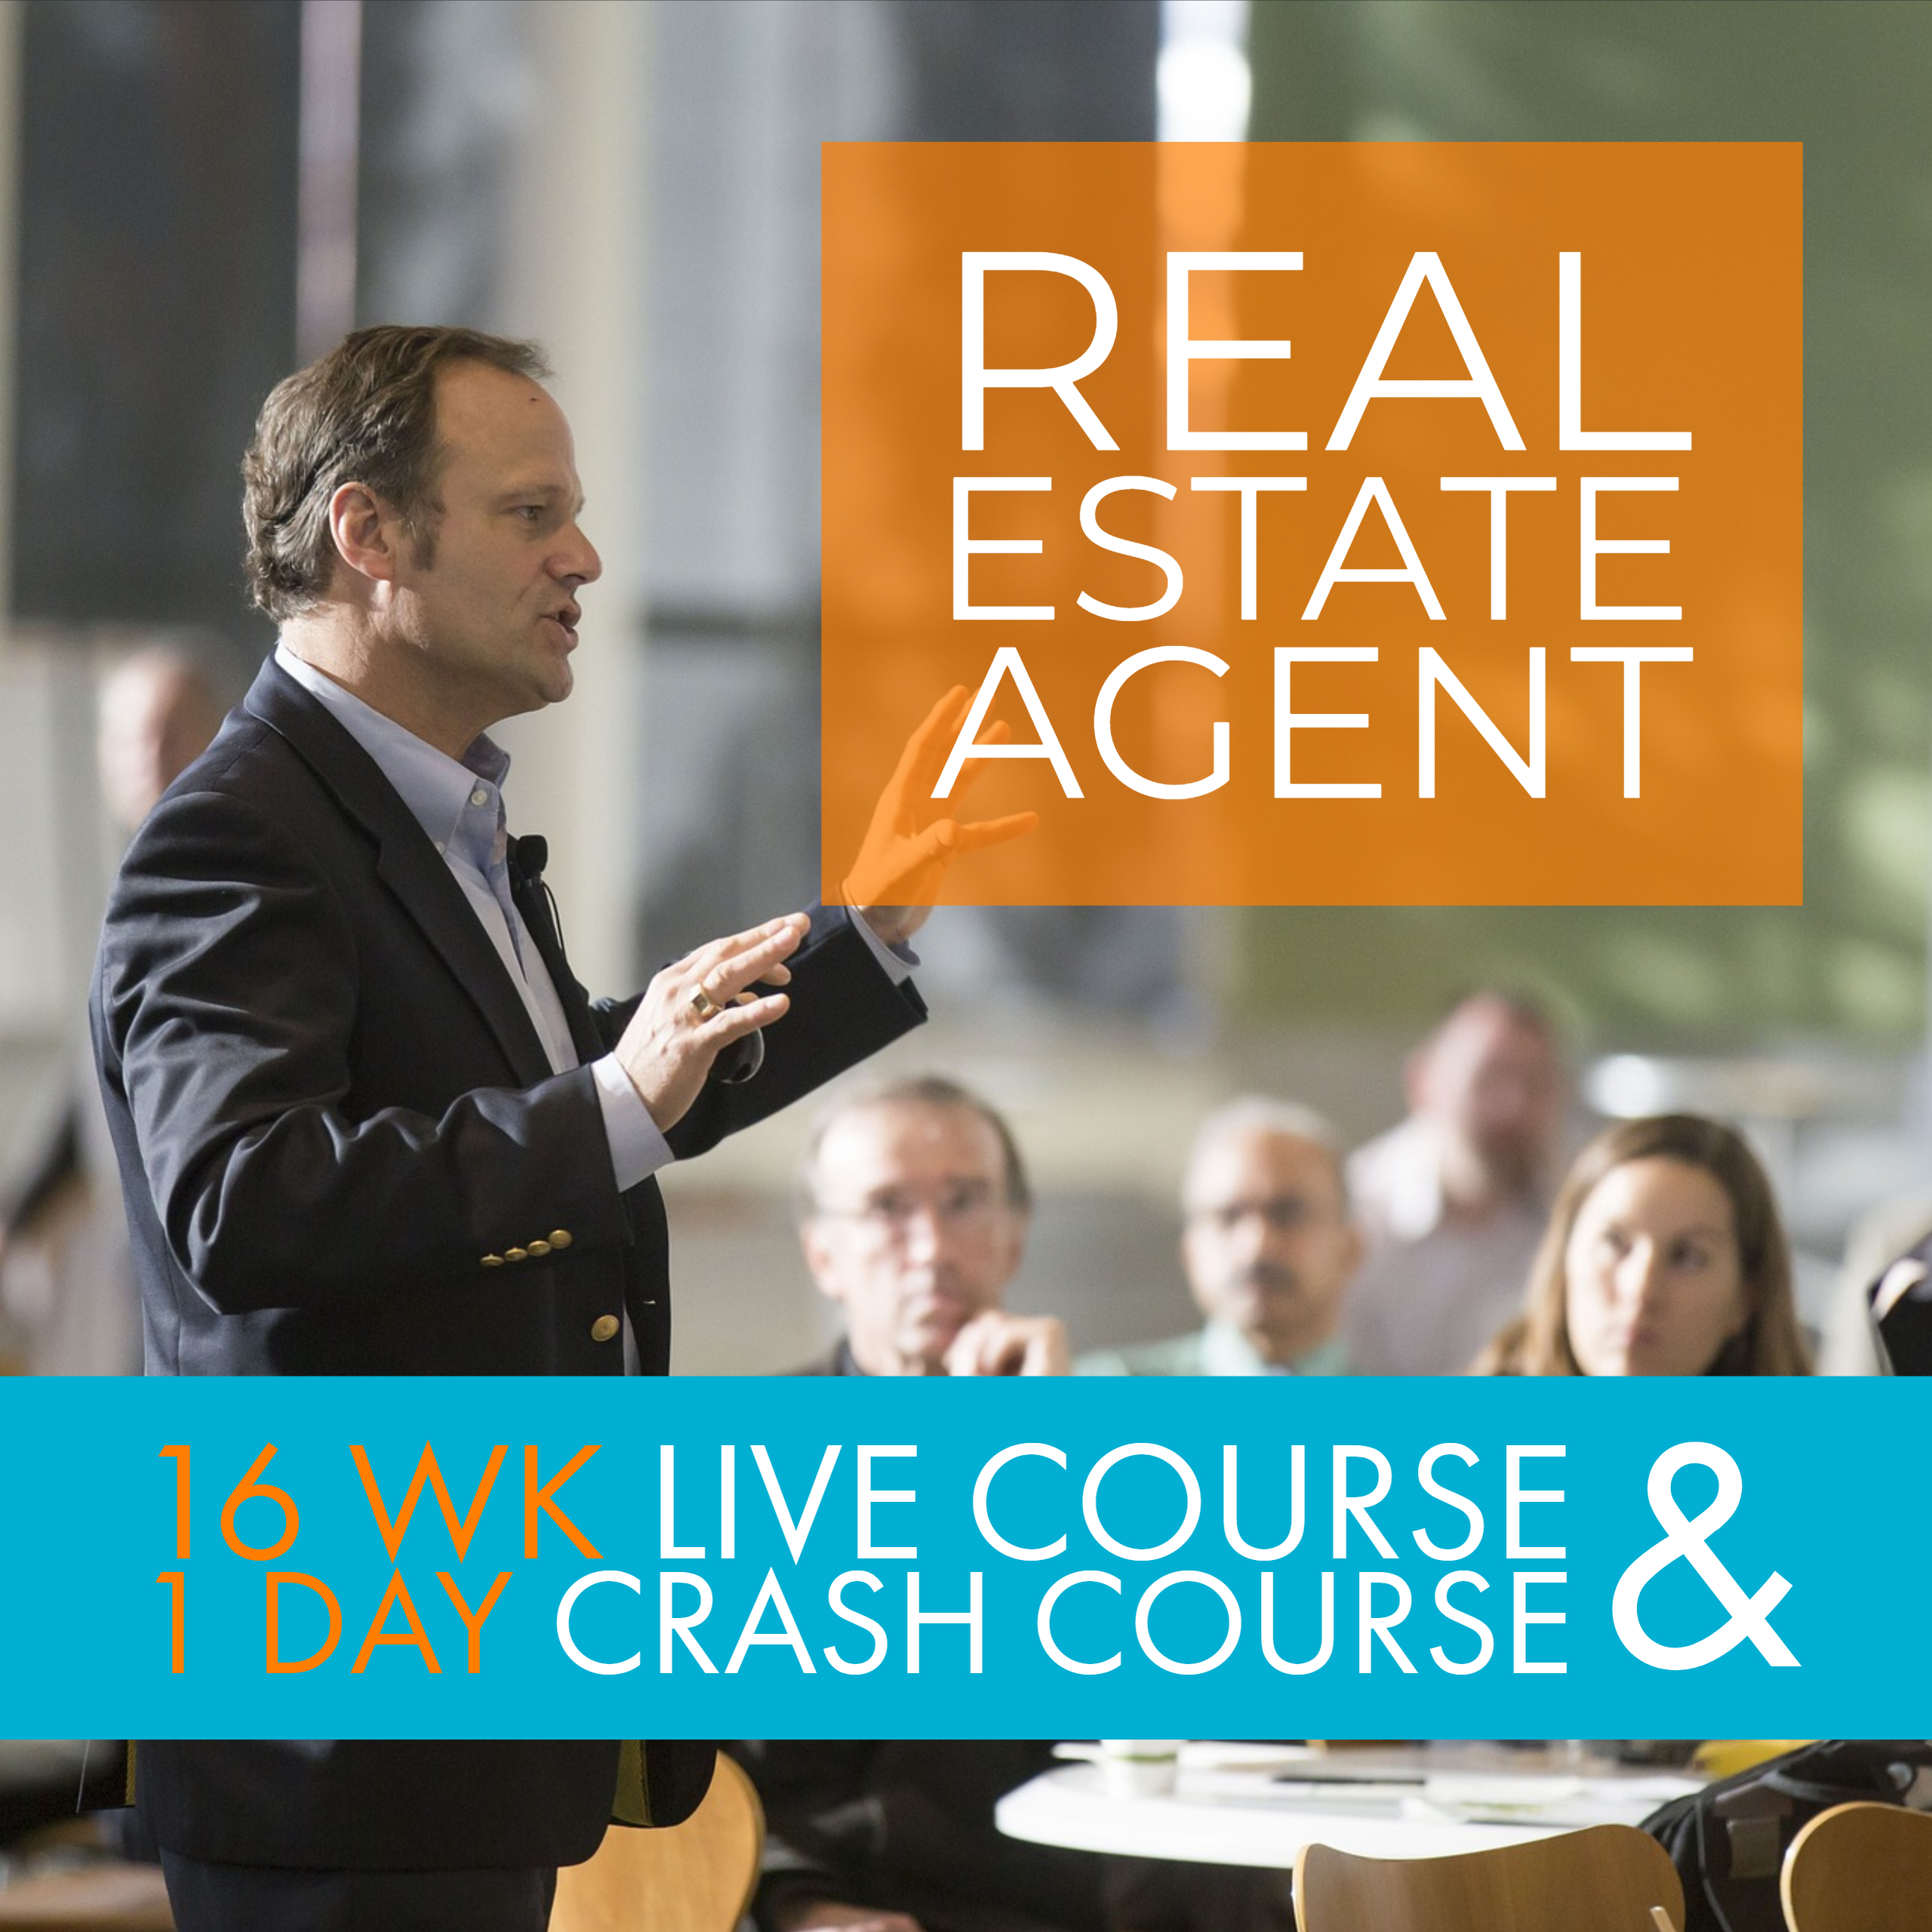 Combo Real Estate Agent Course 1 Day Crash Course get your real estate license best real estate school in los angeles best real estate classes los angeles college of real estate theCORE2